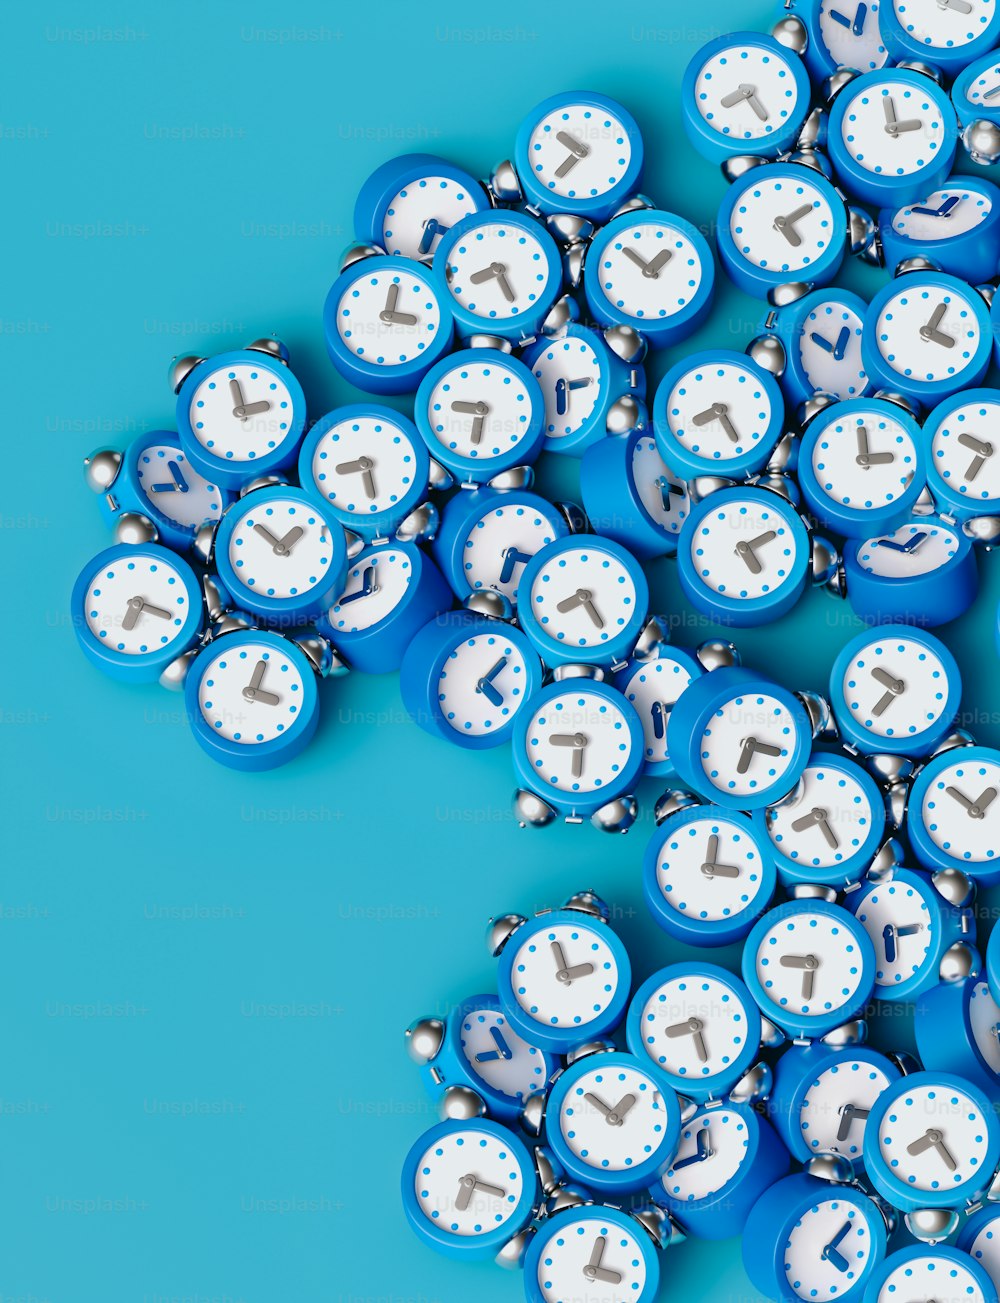 a group of blue and white clocks on a blue background